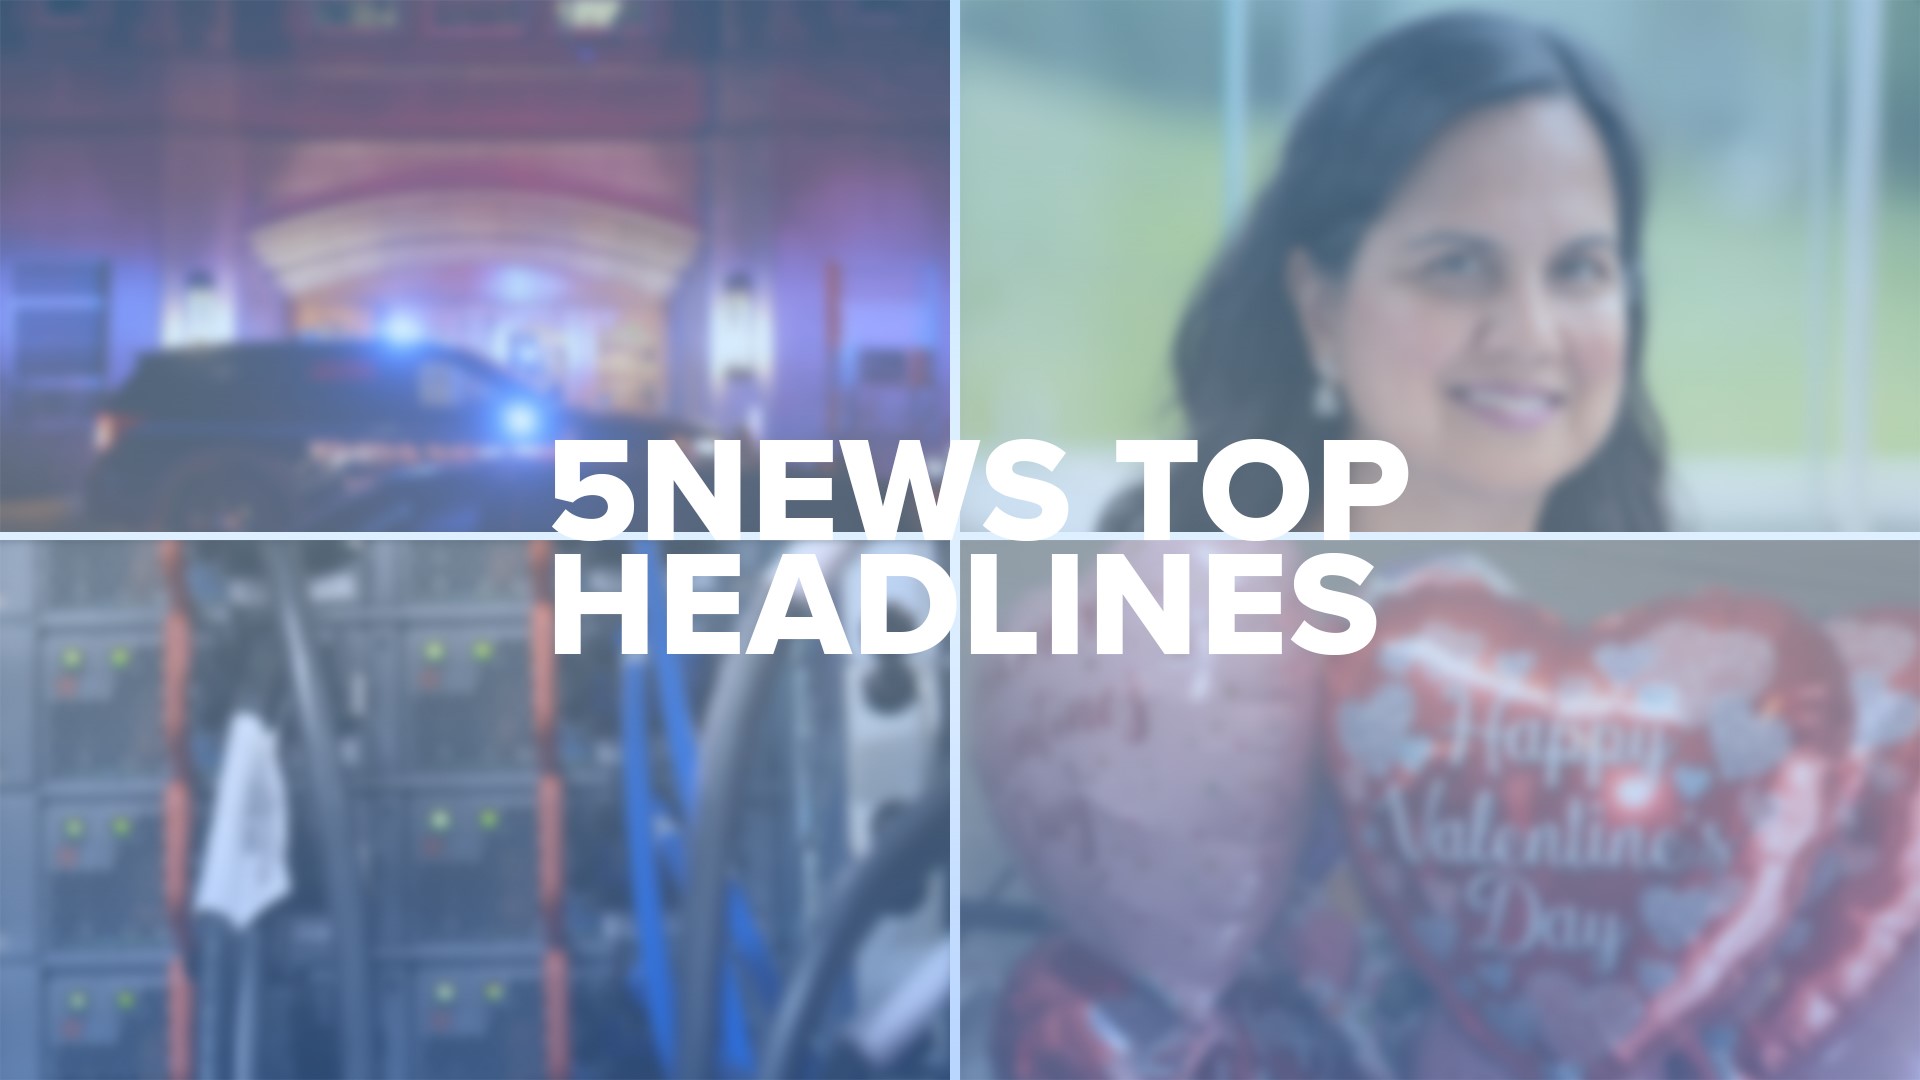 Check out today's top headlines for local news across Northwest Arkansas and the River Valley.